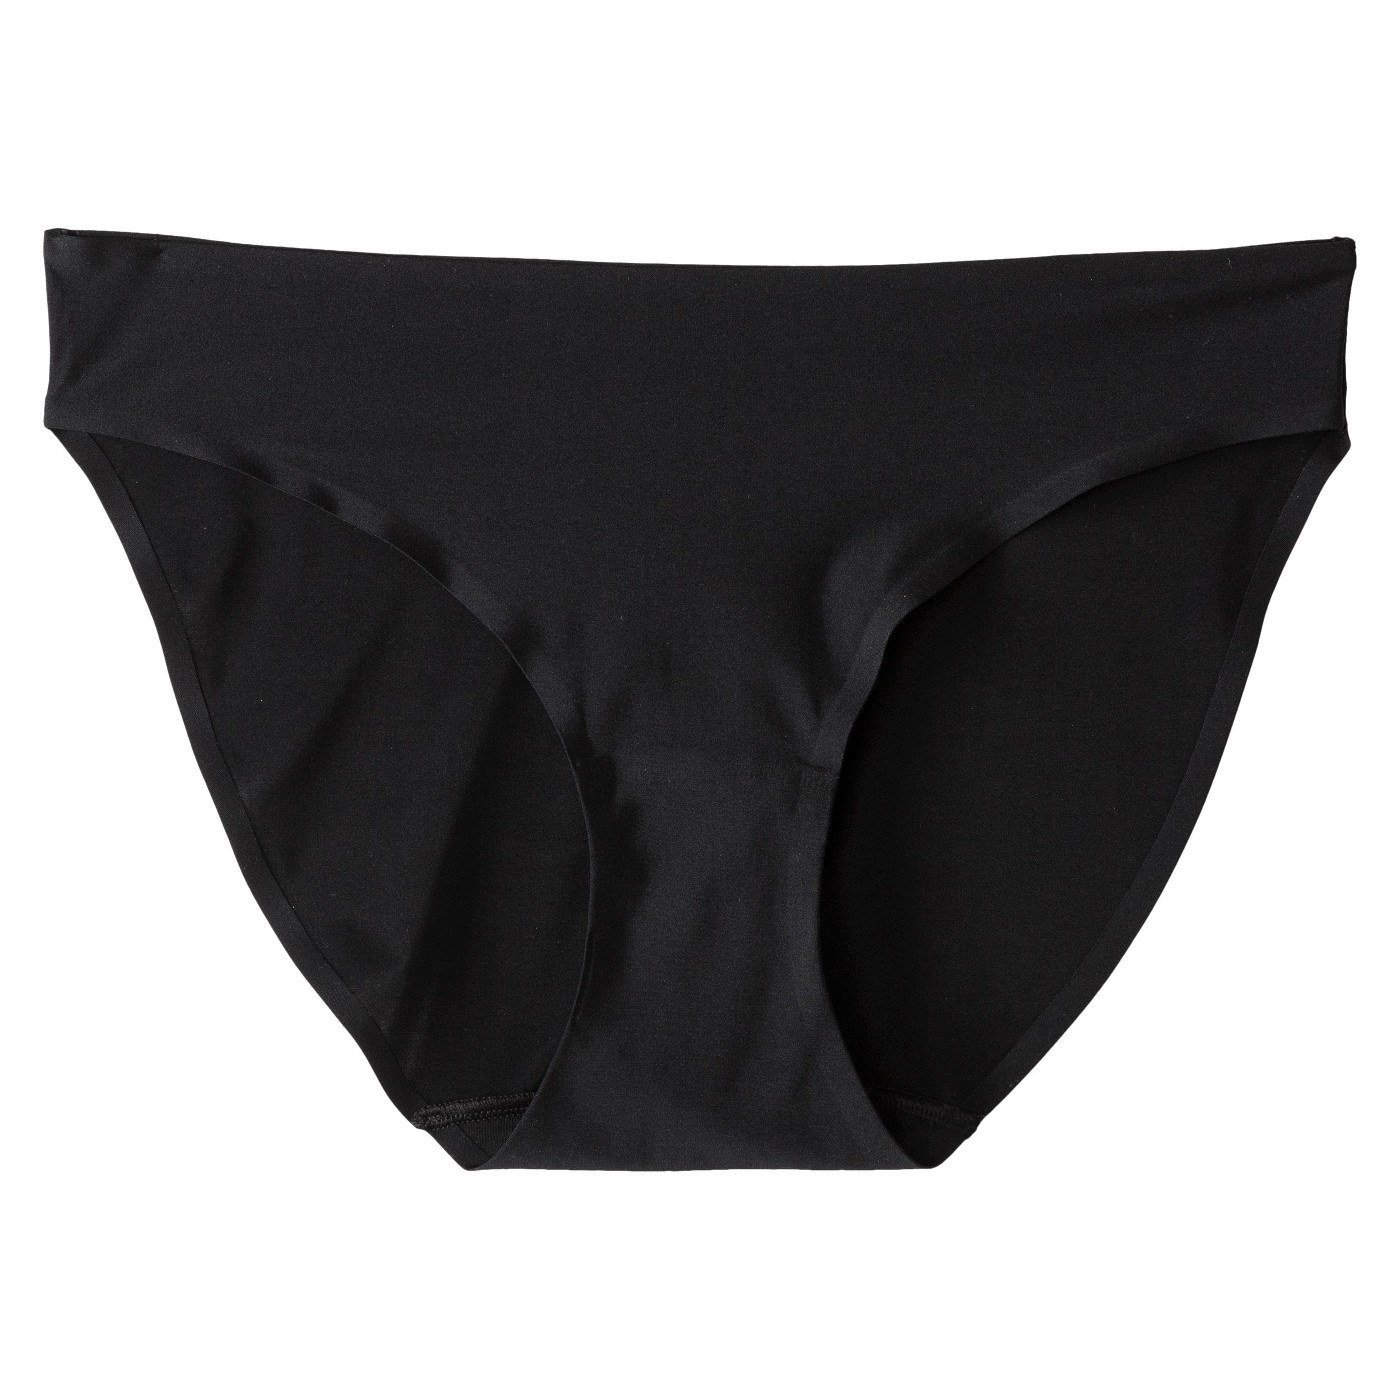 These stay in place, are super soft, don't induce any wedgies, and won...